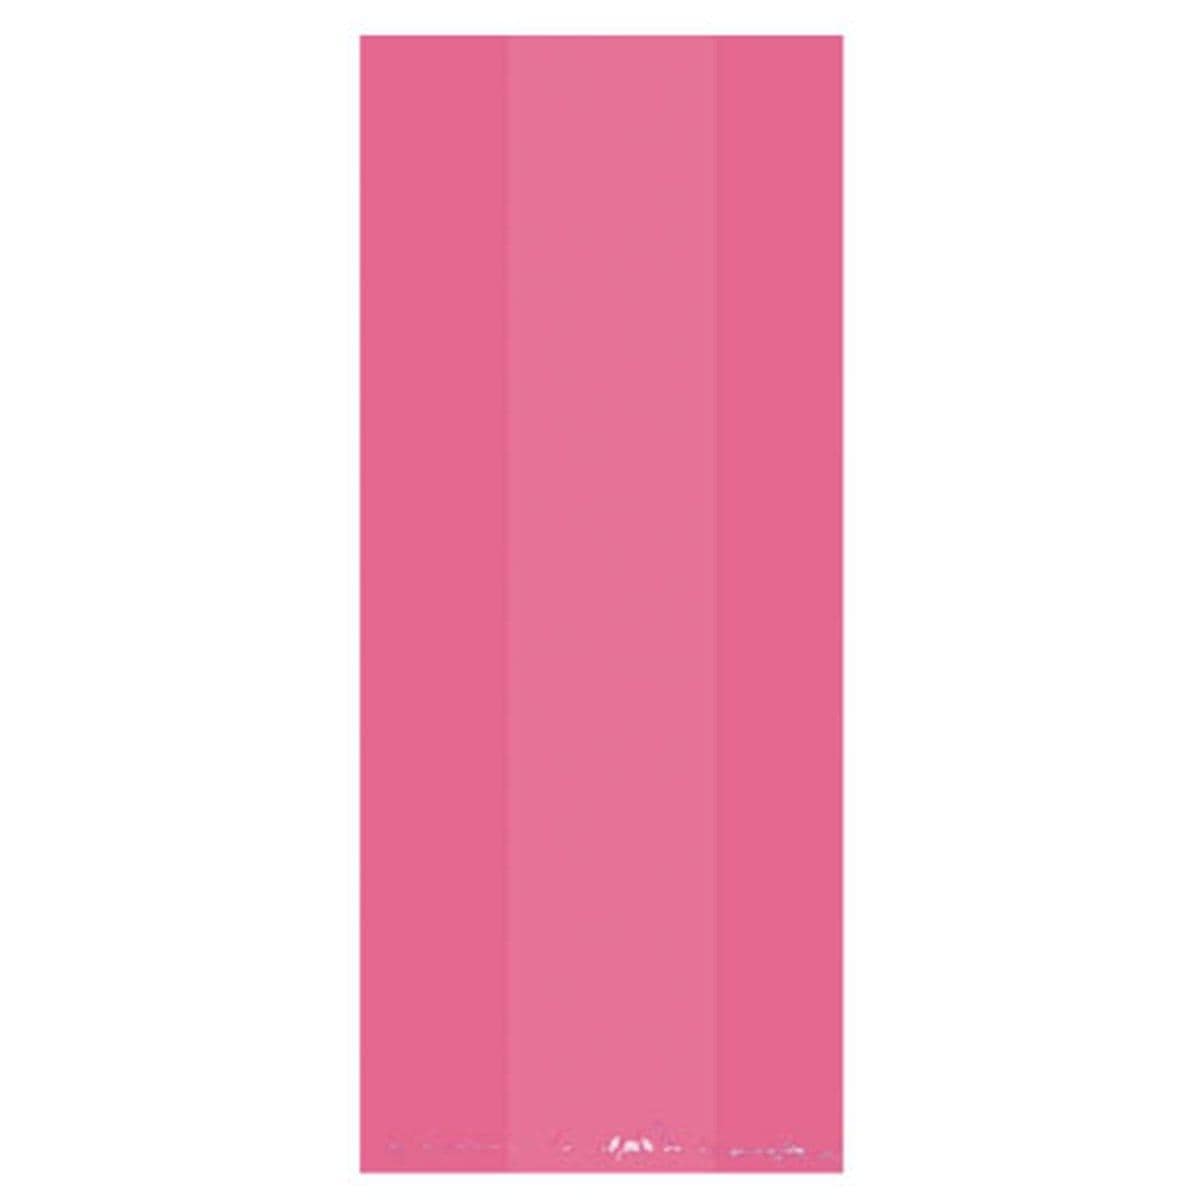 Buy Party Supplies Cello Bags - Bright Pink 9.5 x 4 x 2.25 in. 25/pkg sold at Party Expert